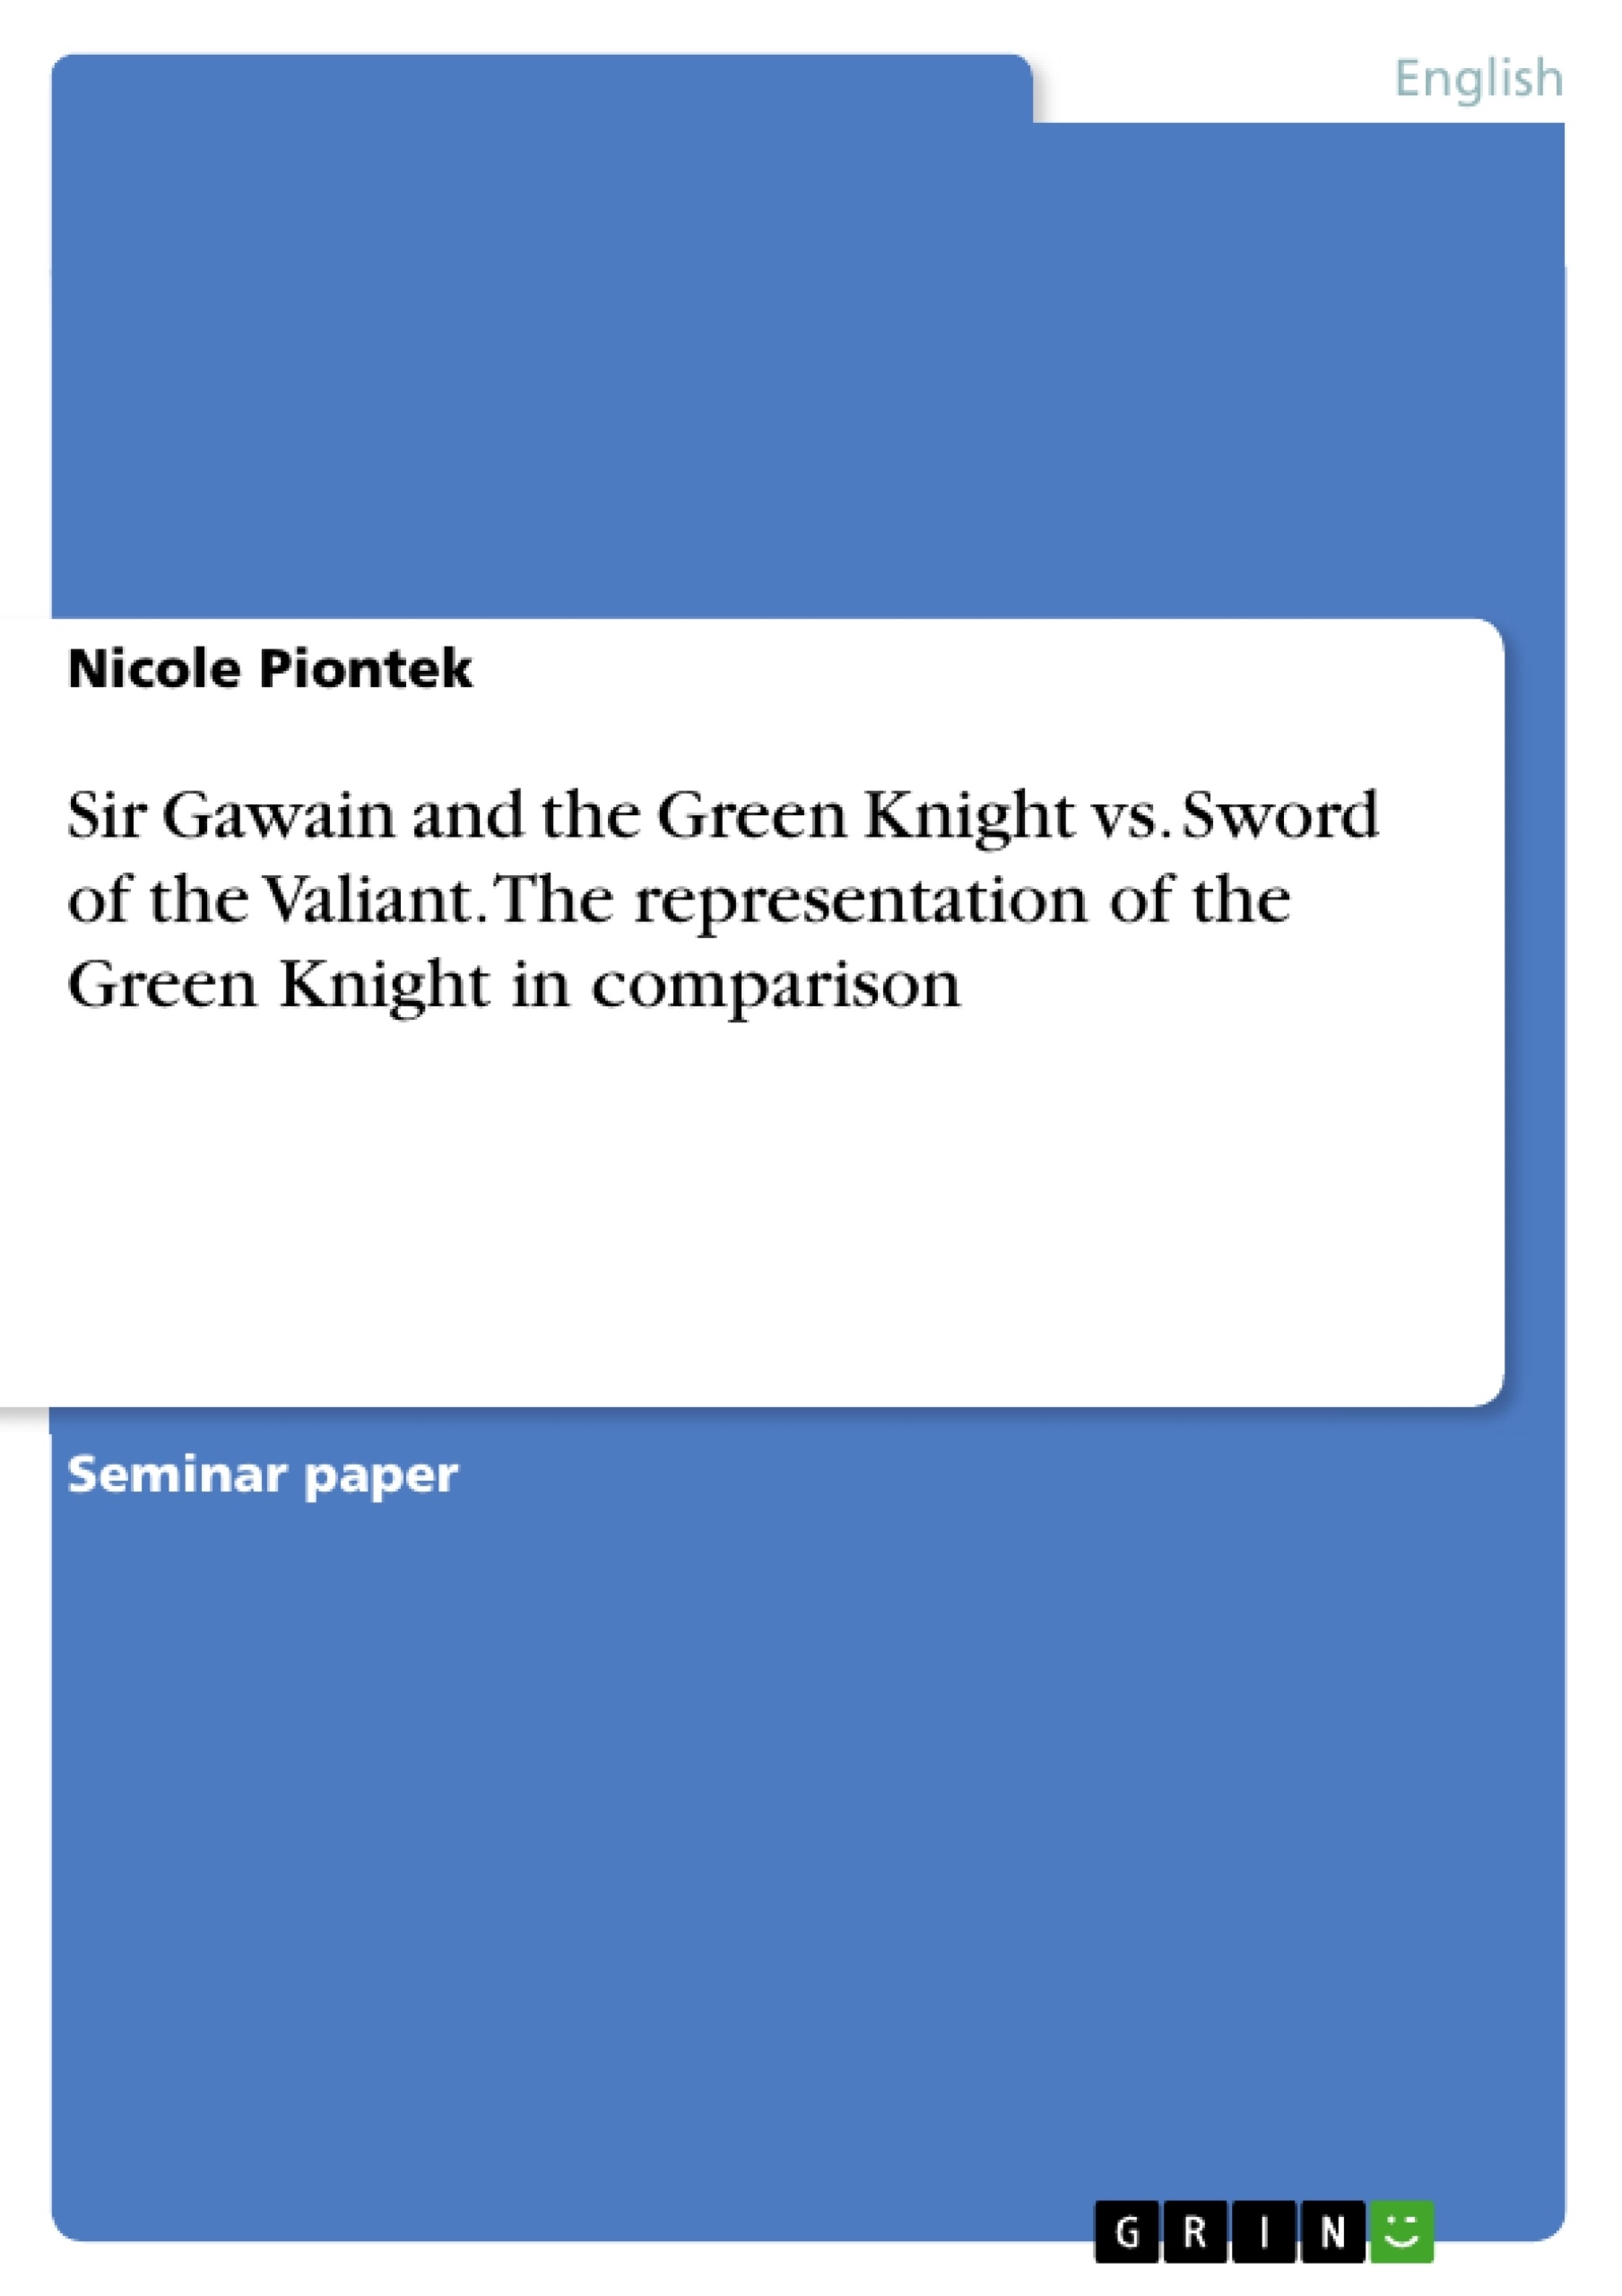 Titre: Sir Gawain and the Green Knight vs. Sword of the Valiant. The representation of the Green Knight in comparison